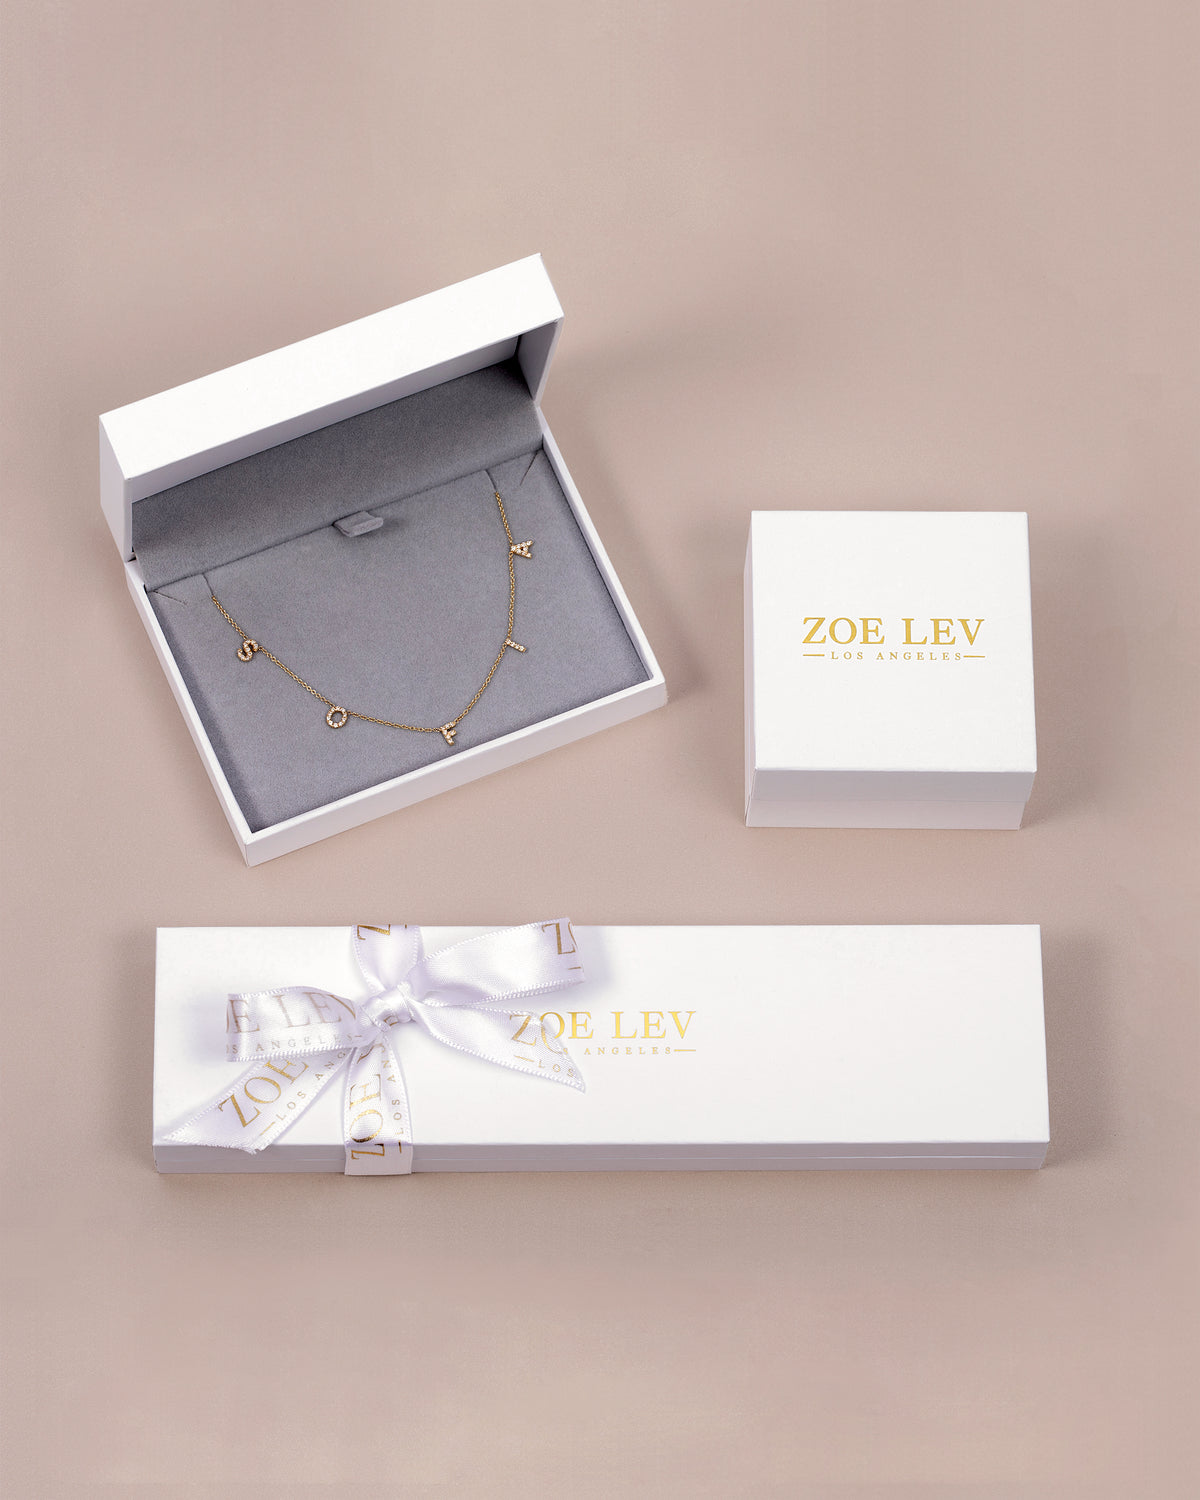 14k Gold Large Paper Clip Chain with Carabiner Necklace